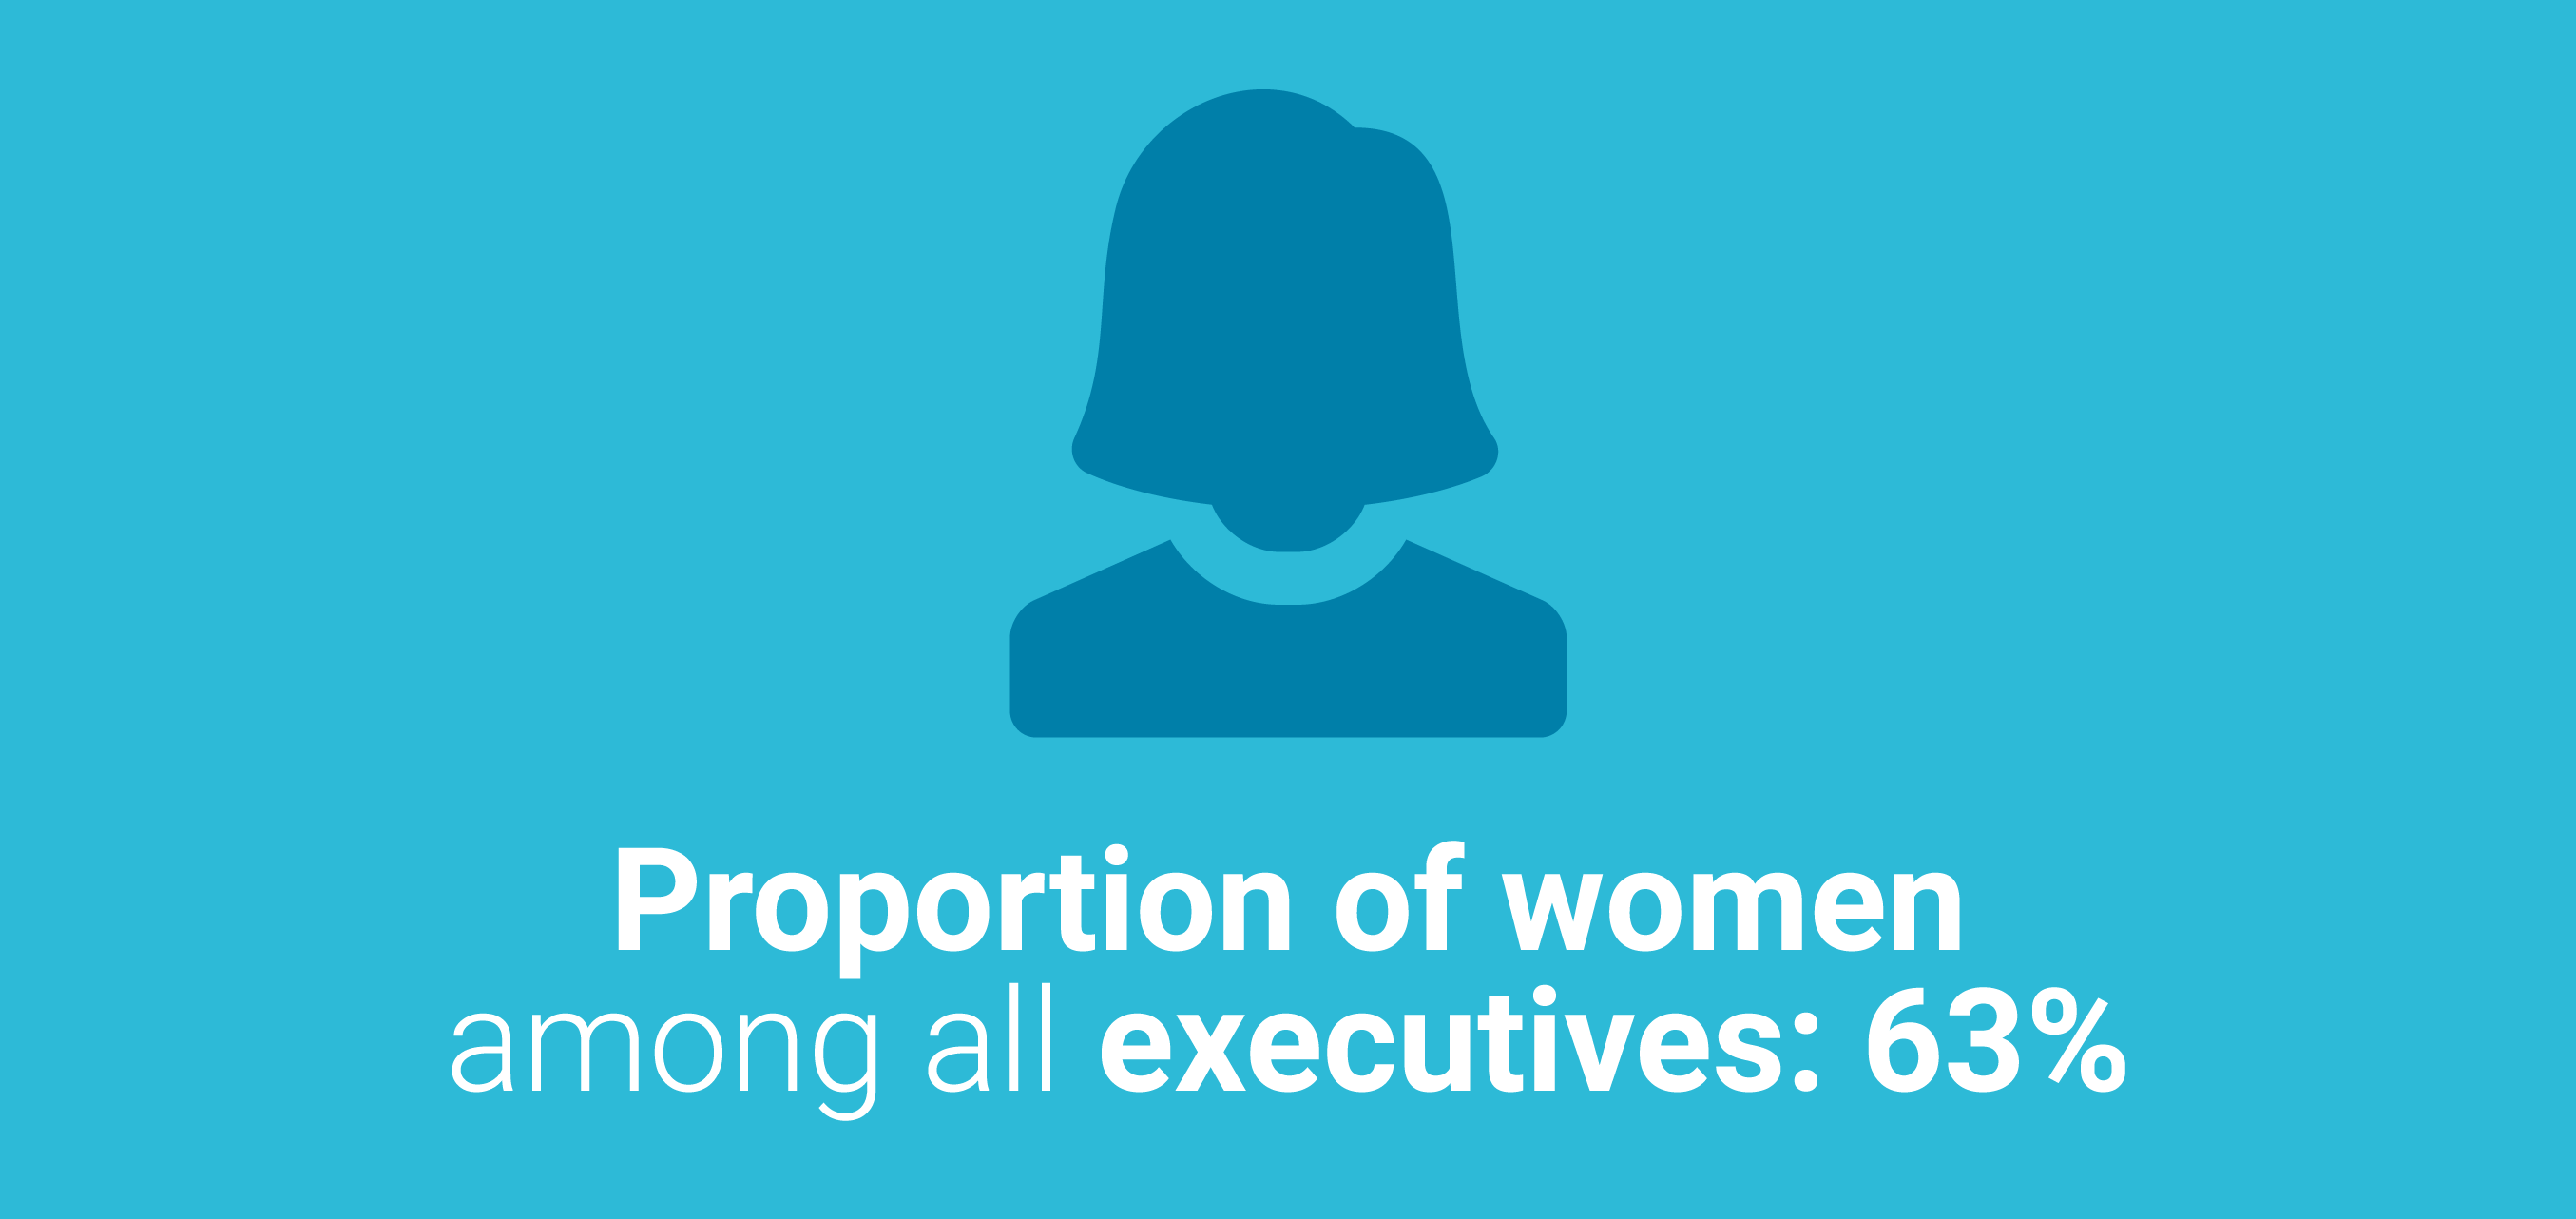 Proportion of women among all executives: 63%